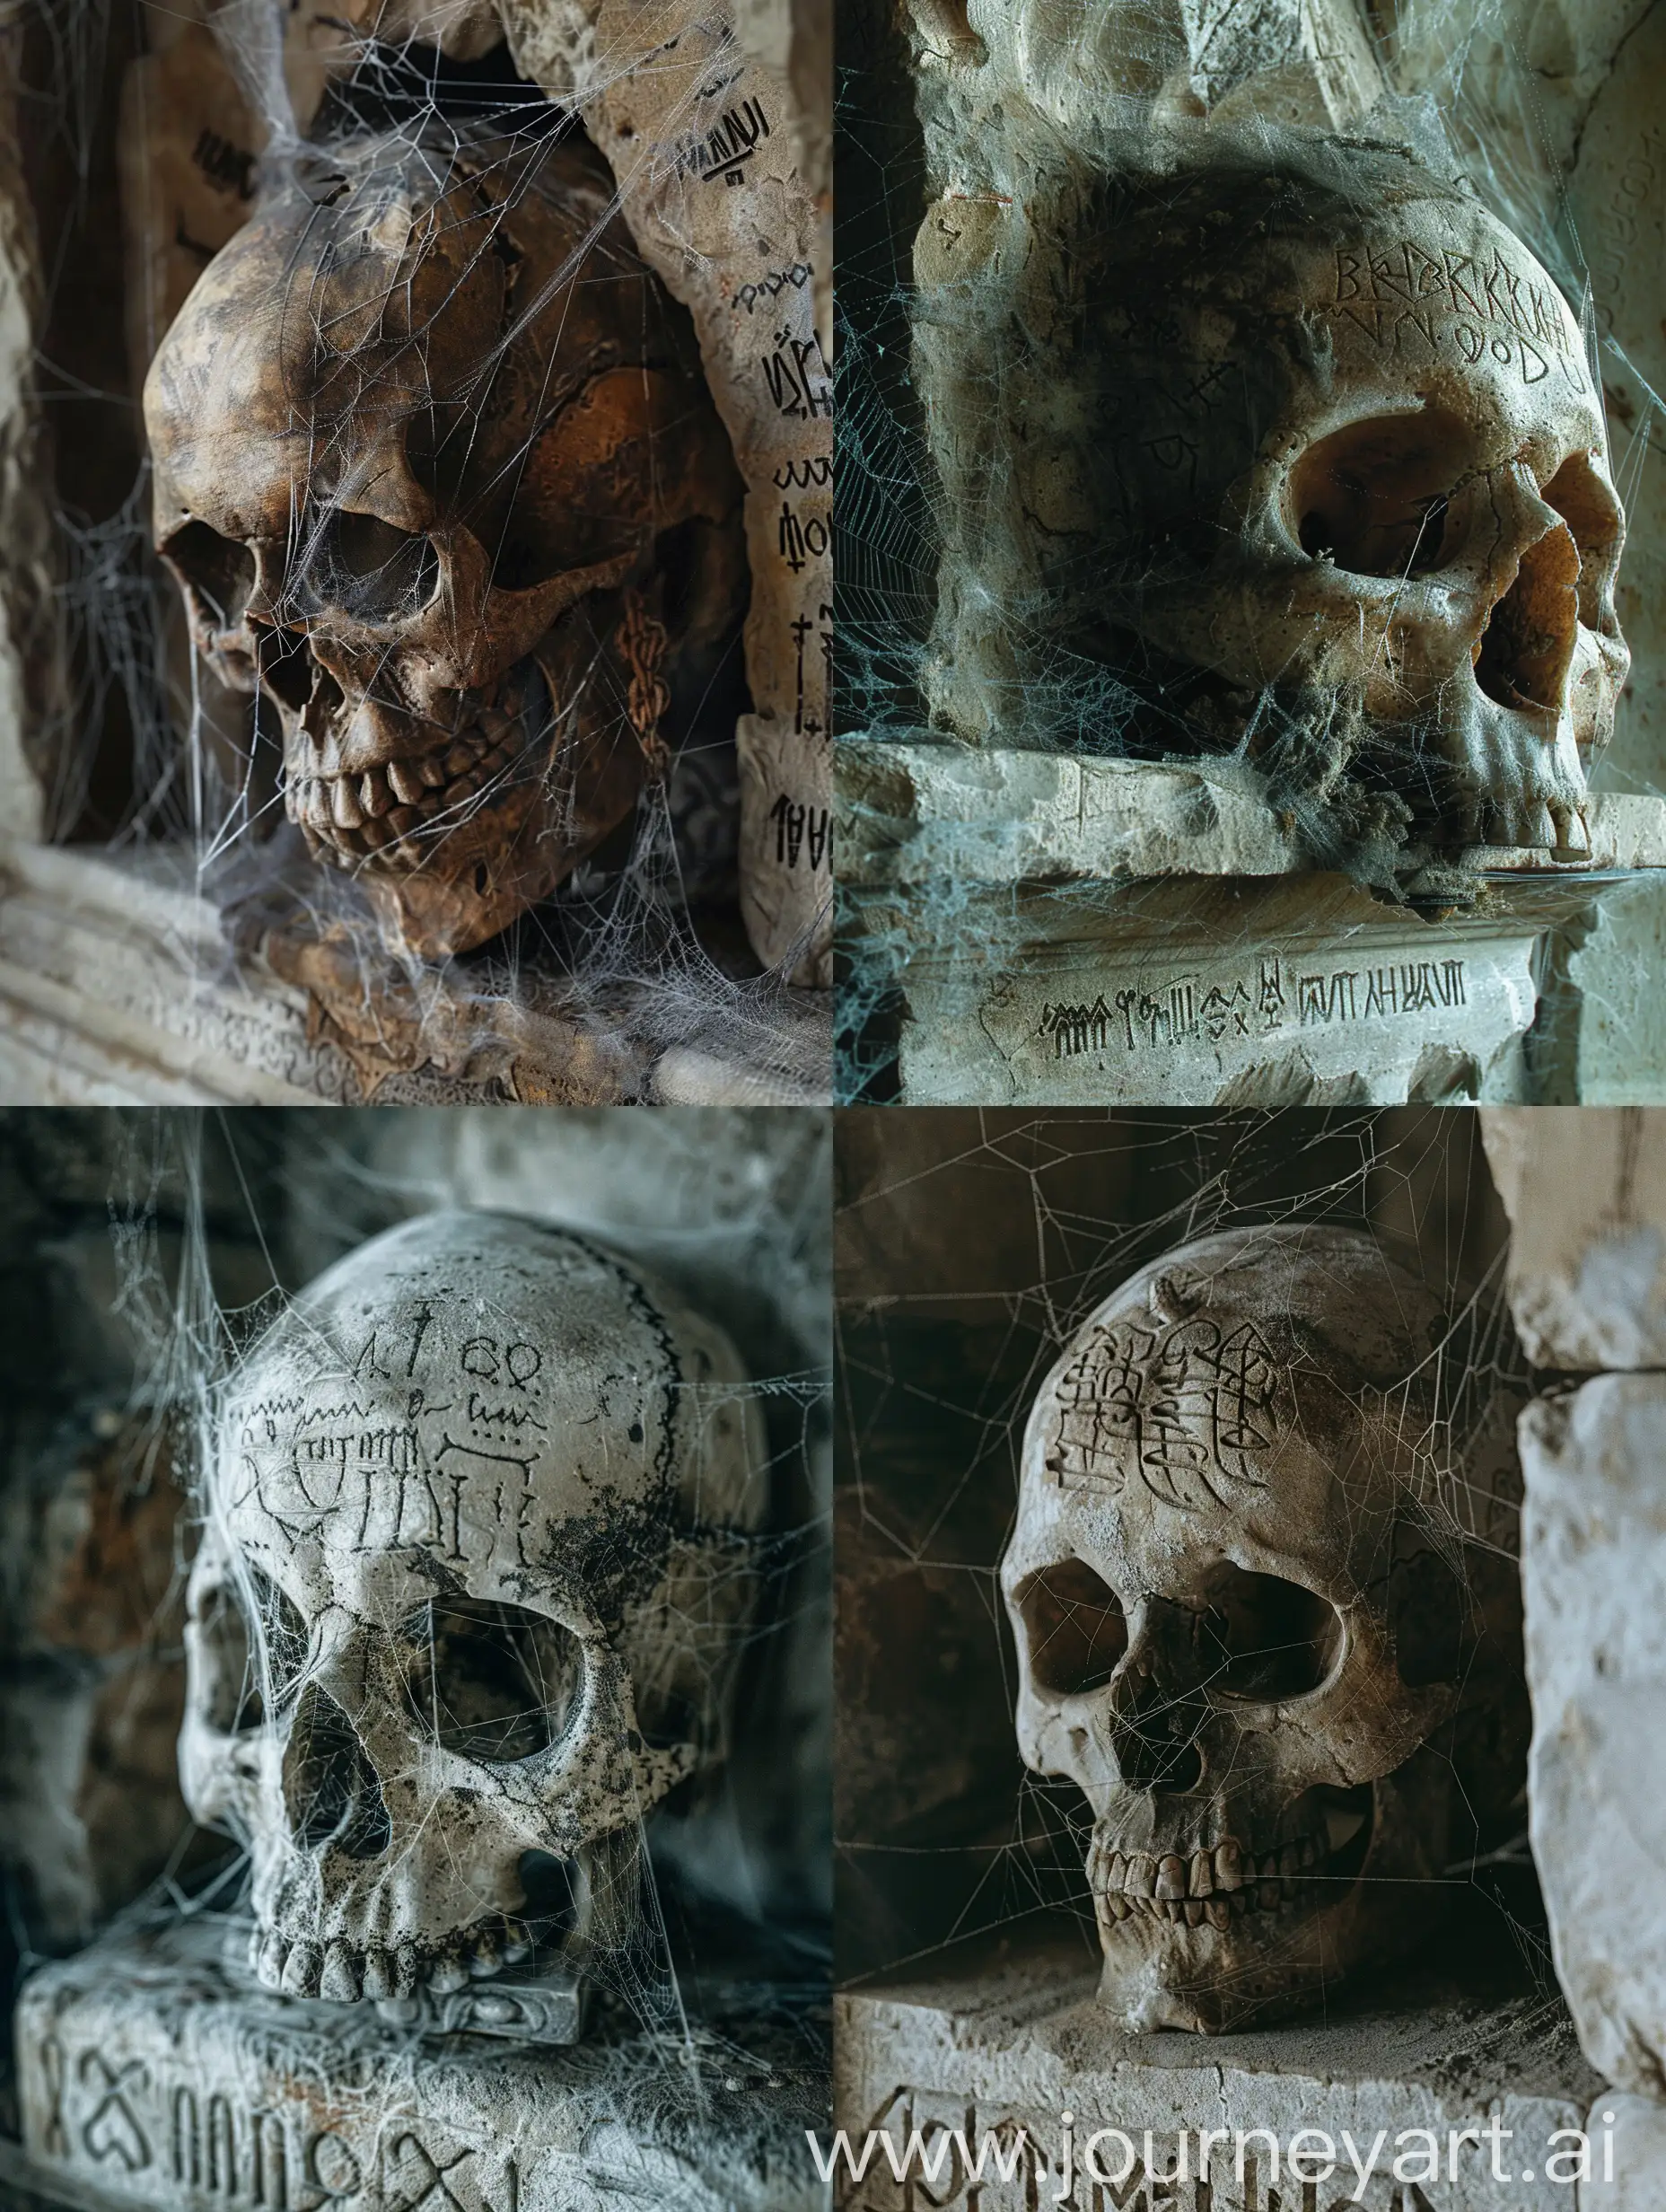 Skull of the King of the Dead,Beksinski grotesque haunting unsettling dark,on ancient On a stone shelf,cobwebs everywhere,runic script,incredible detail,terrifying.